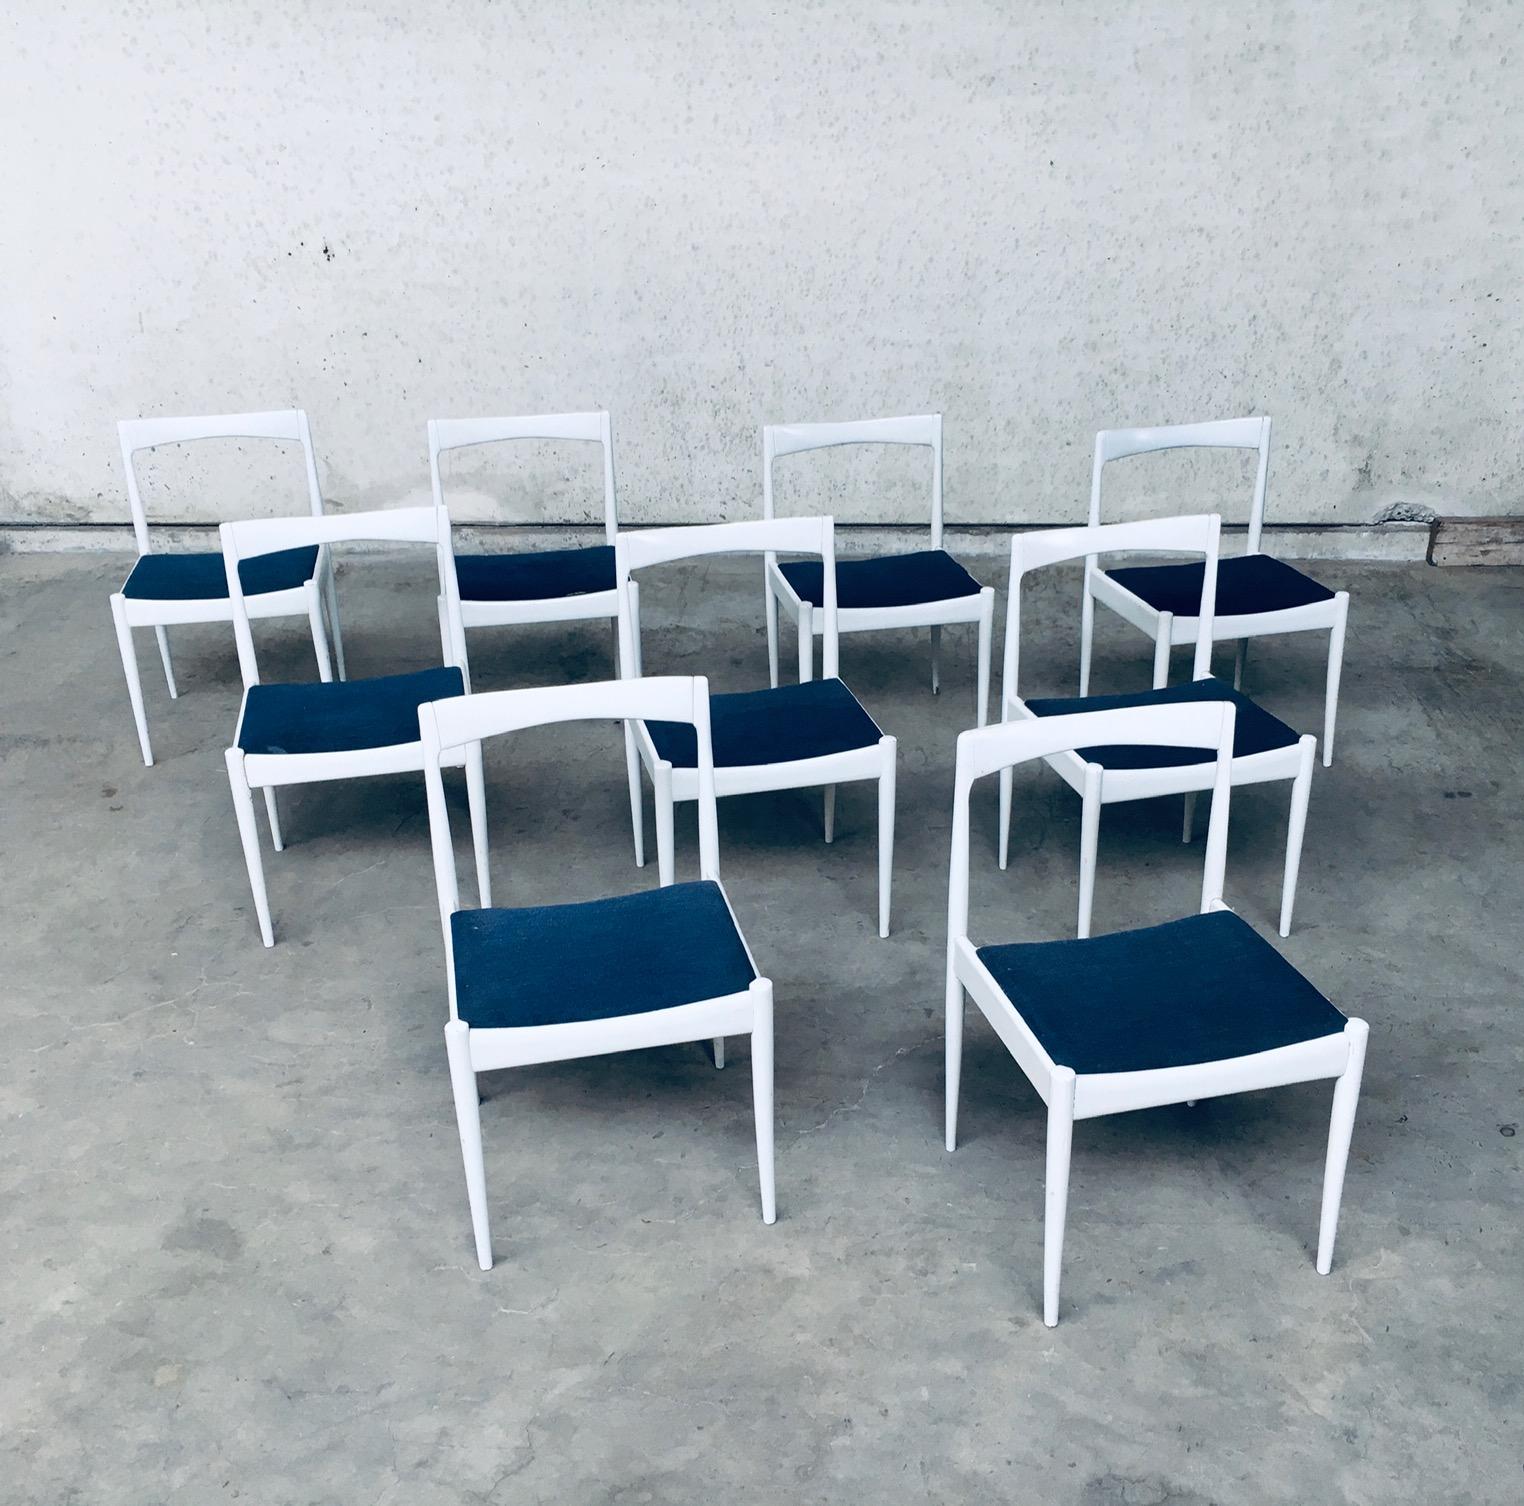 Vintage Mid-Century Modern Belgian design set of 9 white dining chairs, Belgium 1970's. White laquered birch wooden frame with original blue denim looking fabric seats. In the style of scandinavian midcentury modern design chairs. The white lacquer